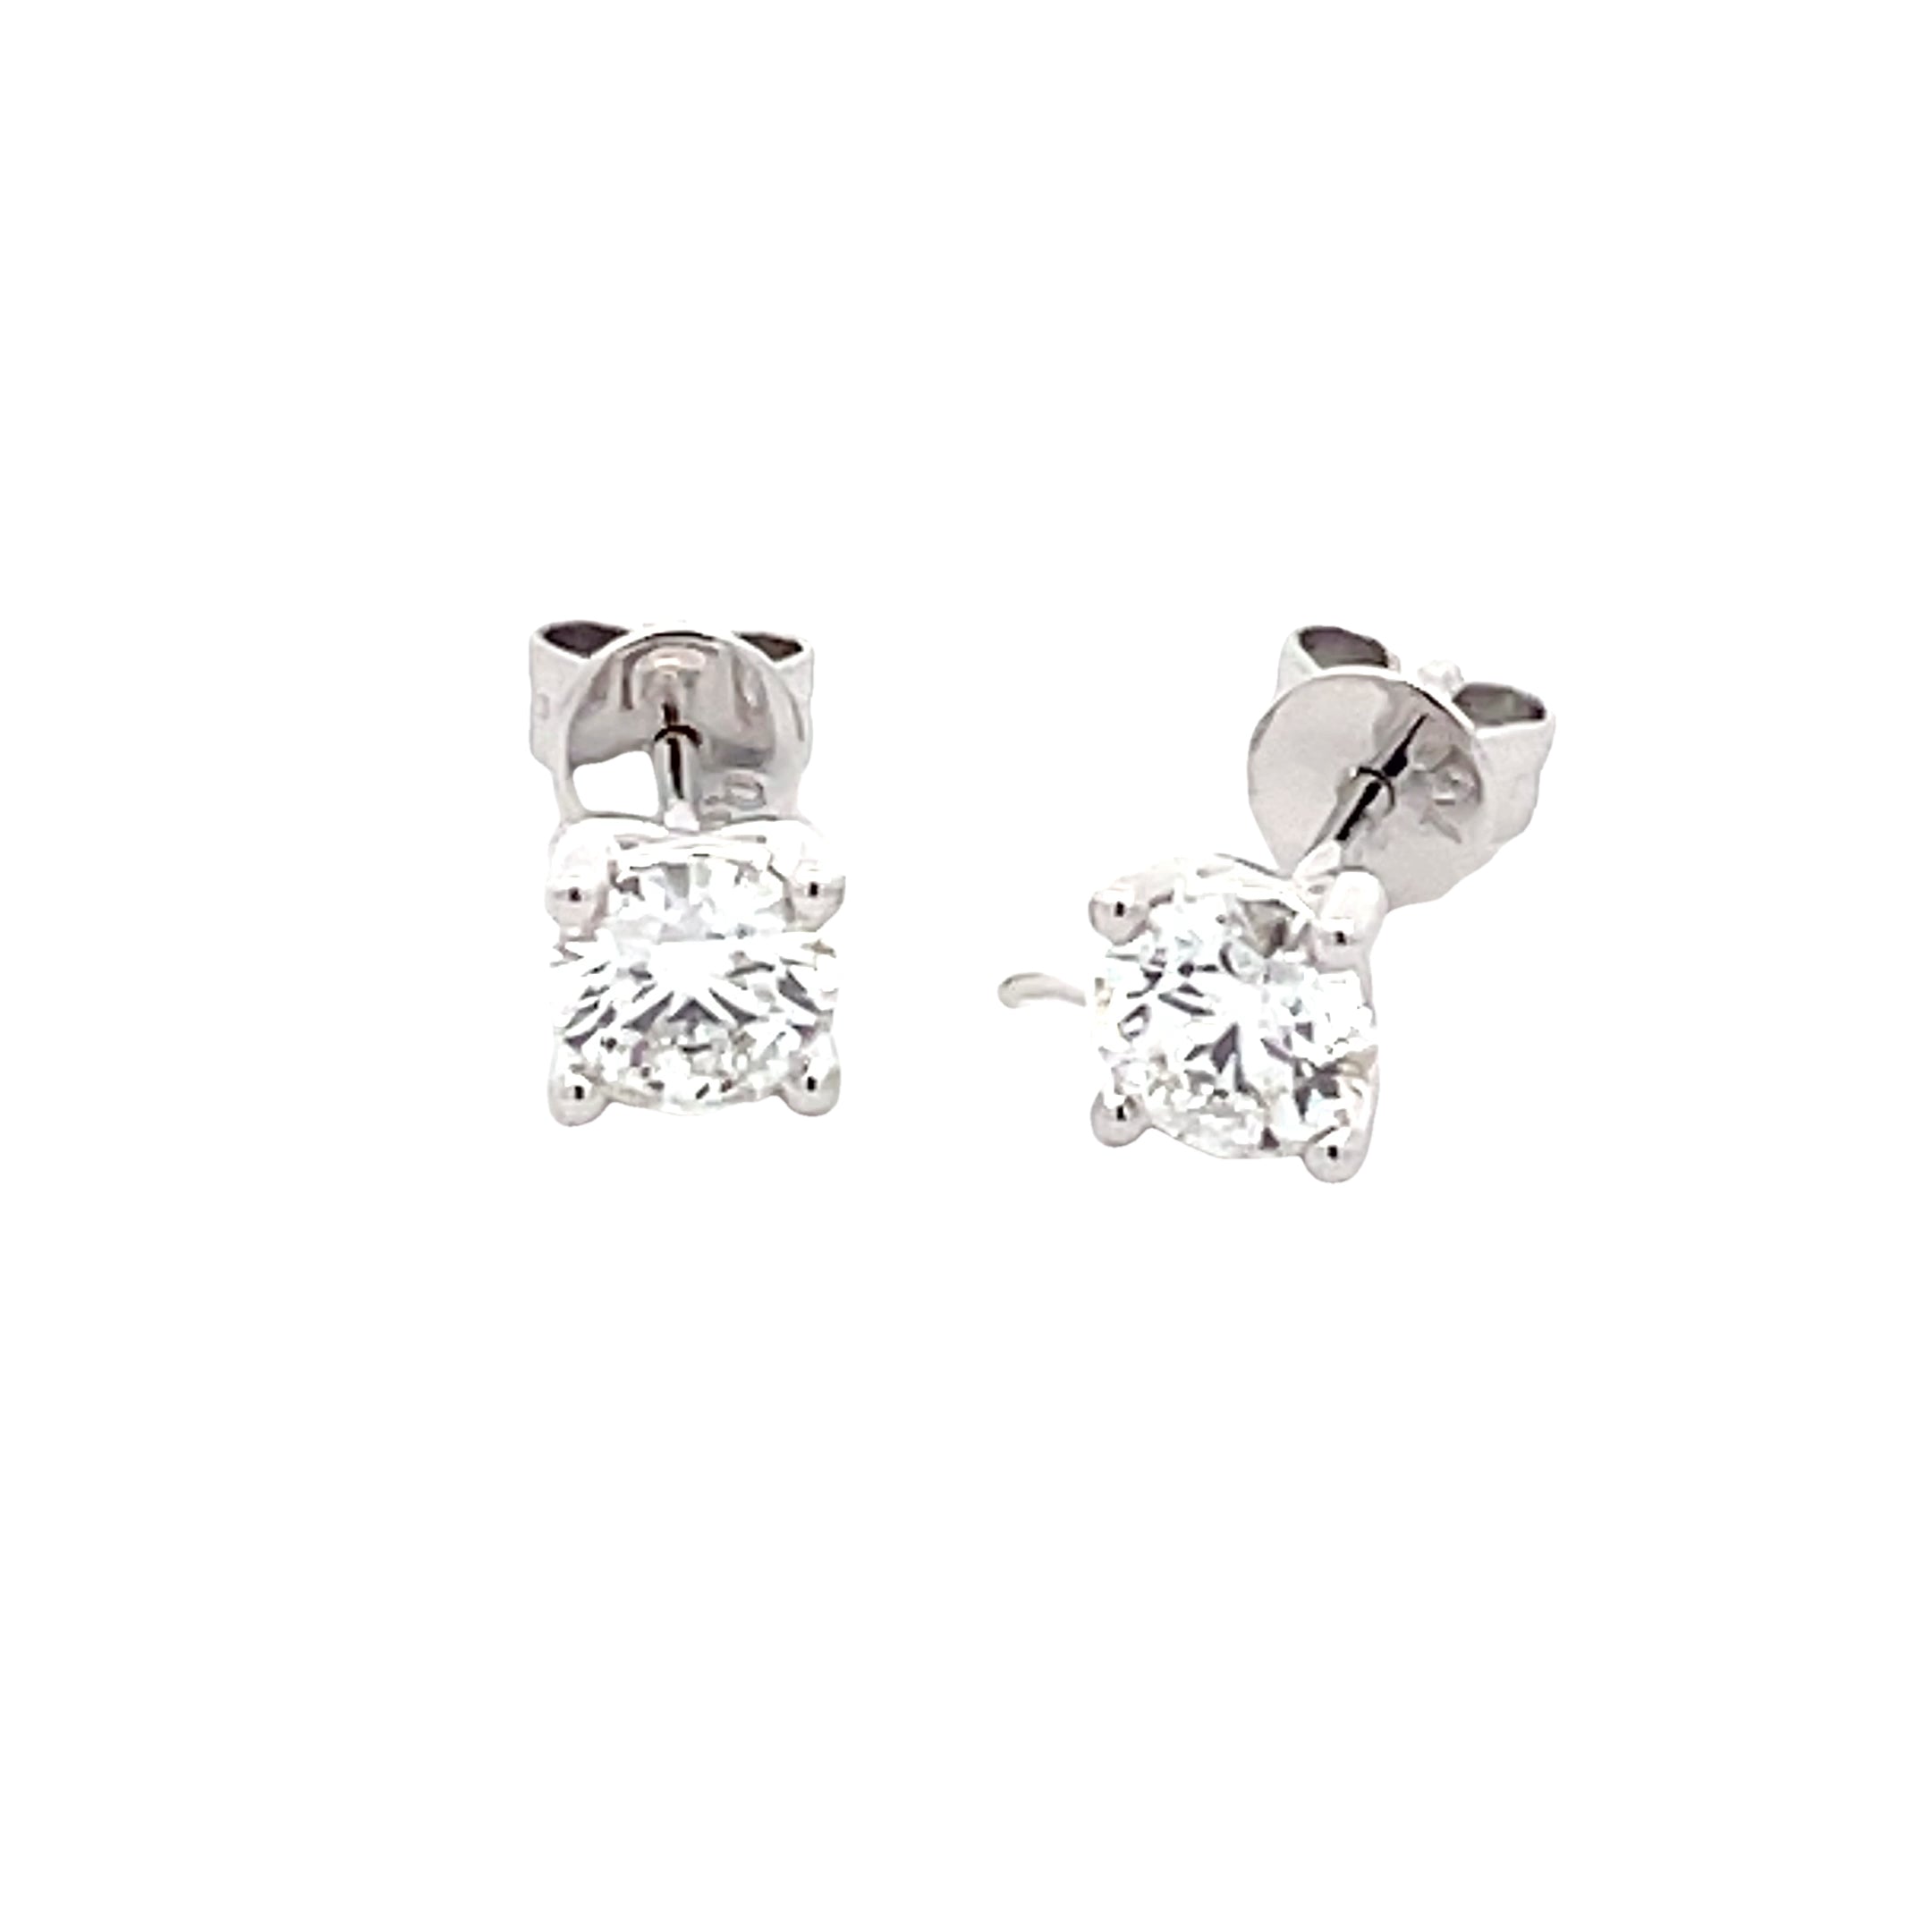 Lab Grown Round Brilliant Cut Diamond Solitaire Earrings - 0.85cts